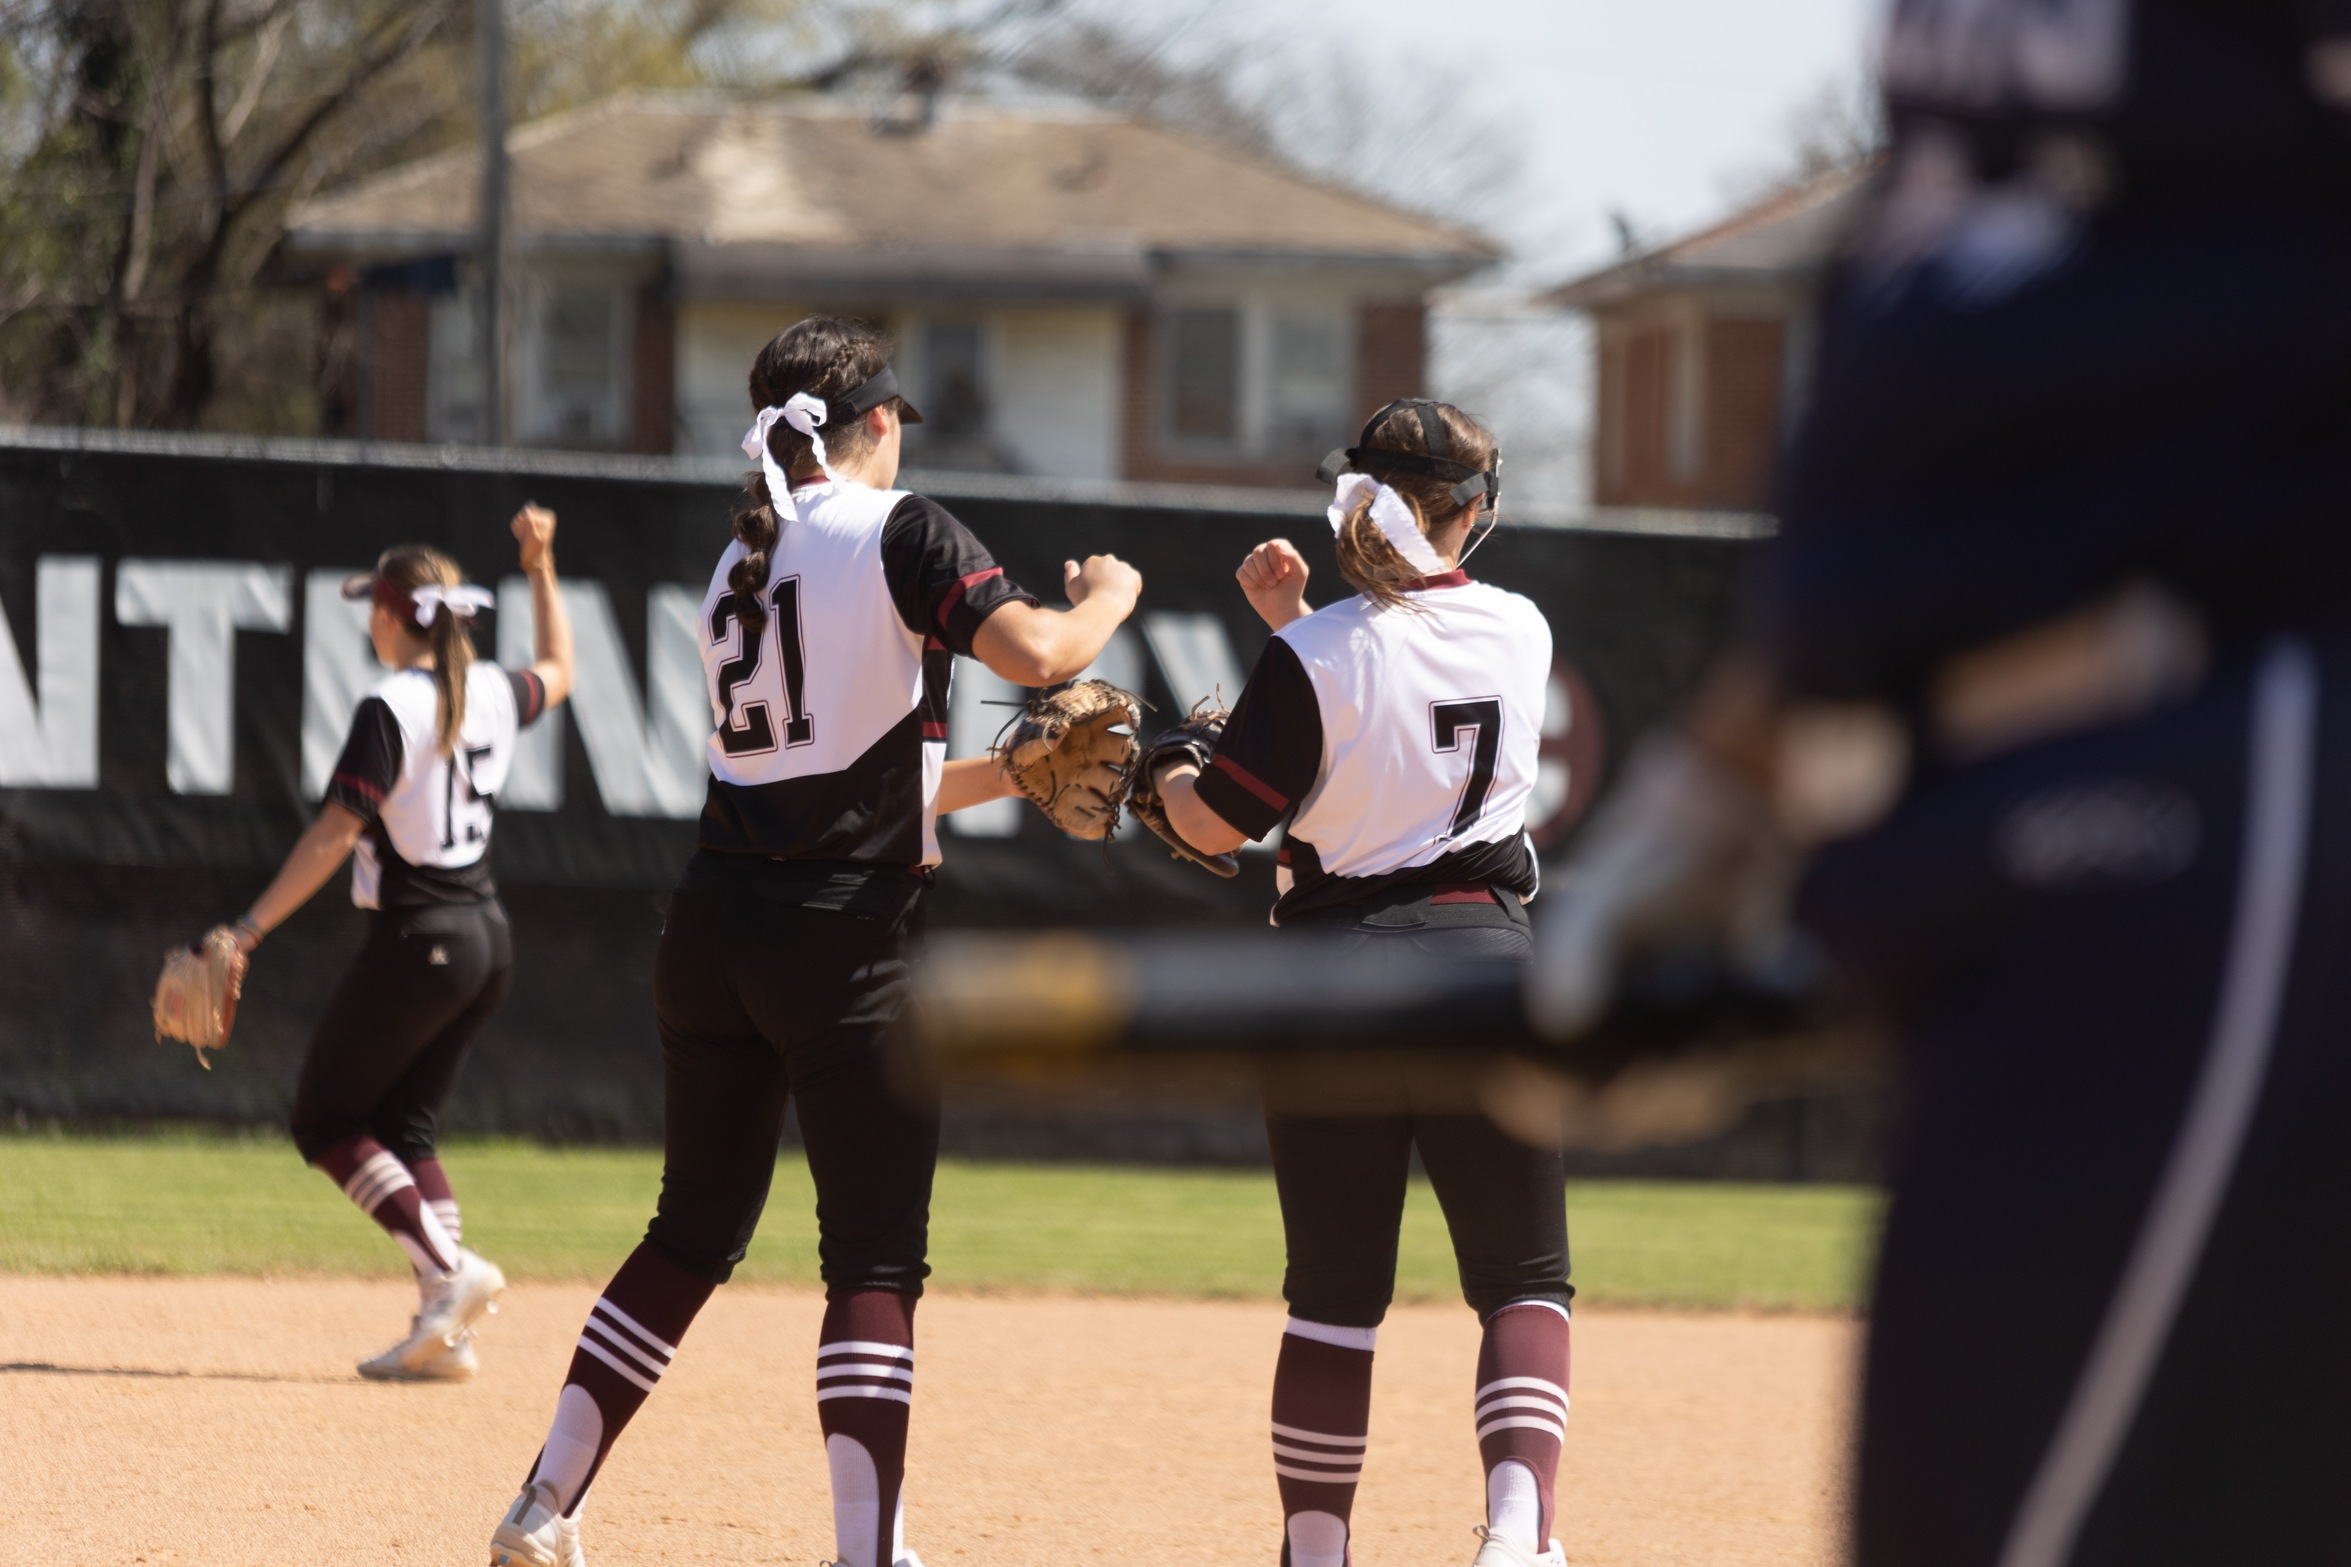 The No. 6 seed Ladies face Schreiner on Saturday in an elimination game.